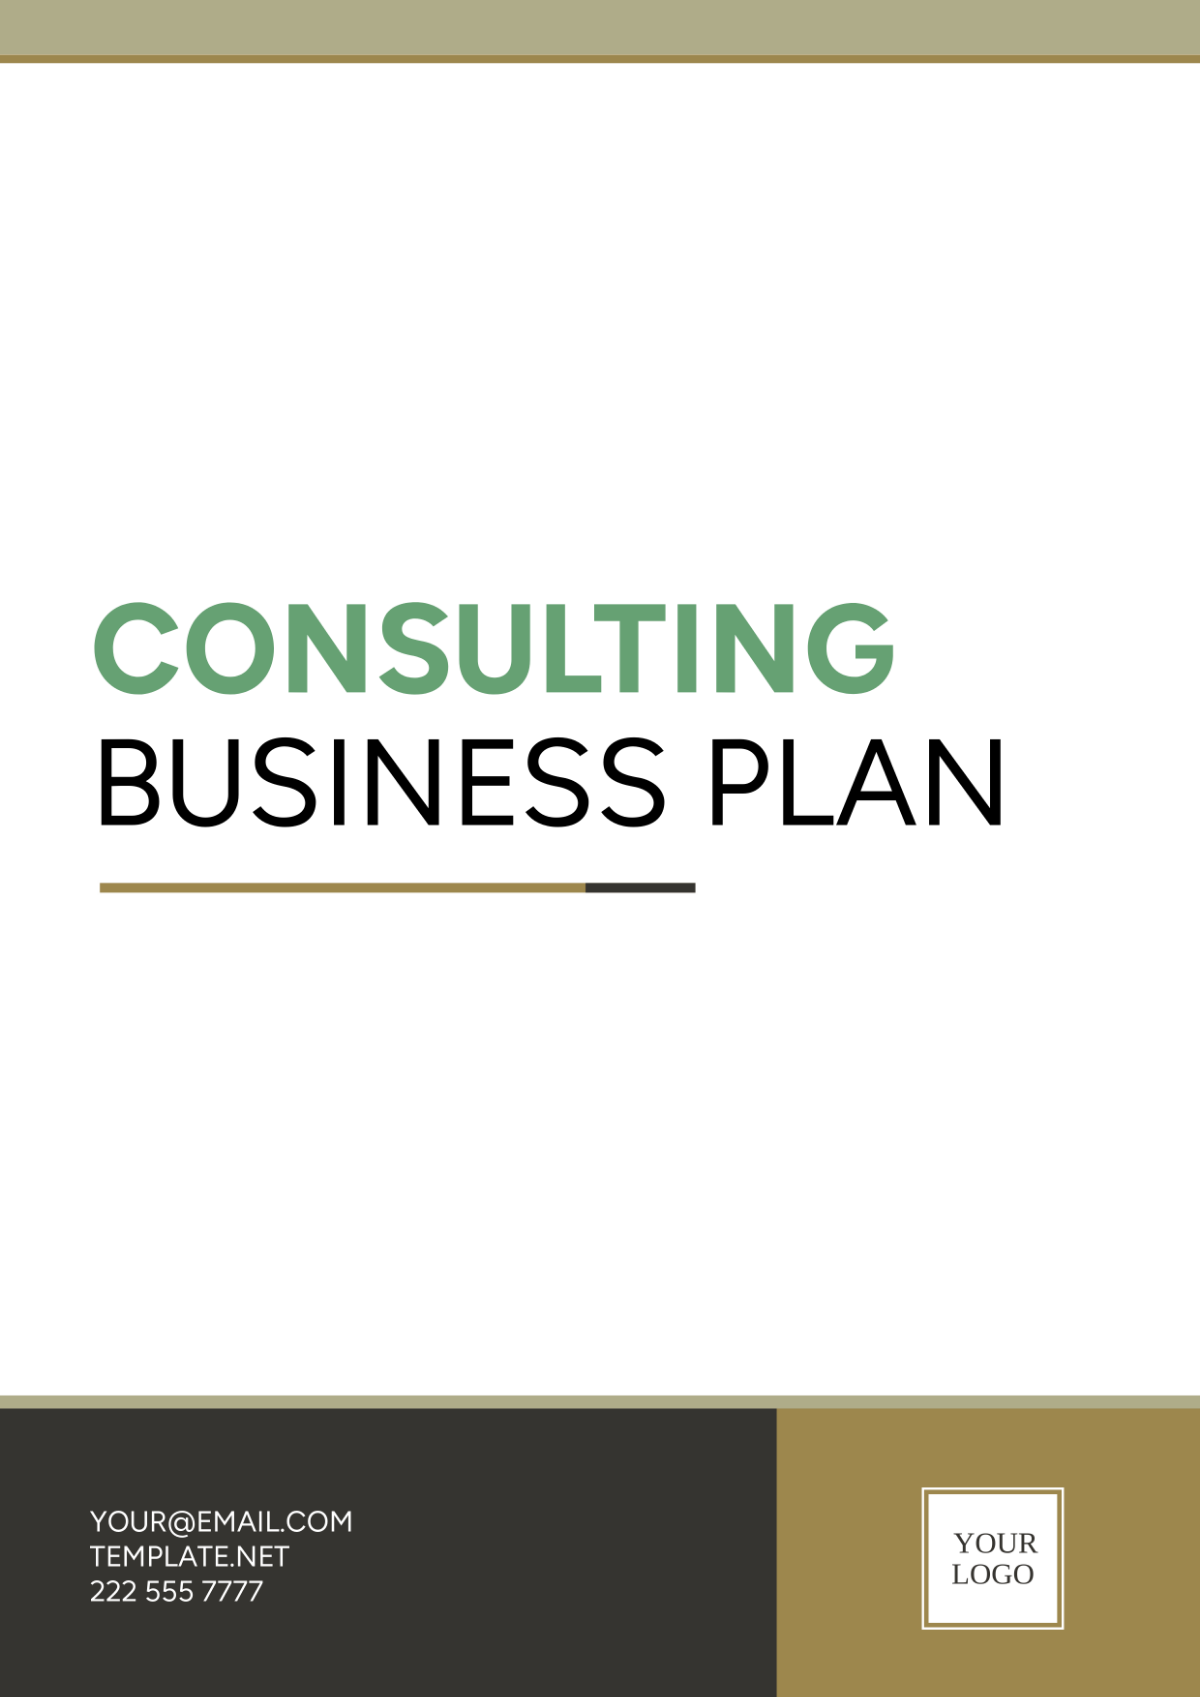 Consulting Business Plan Template